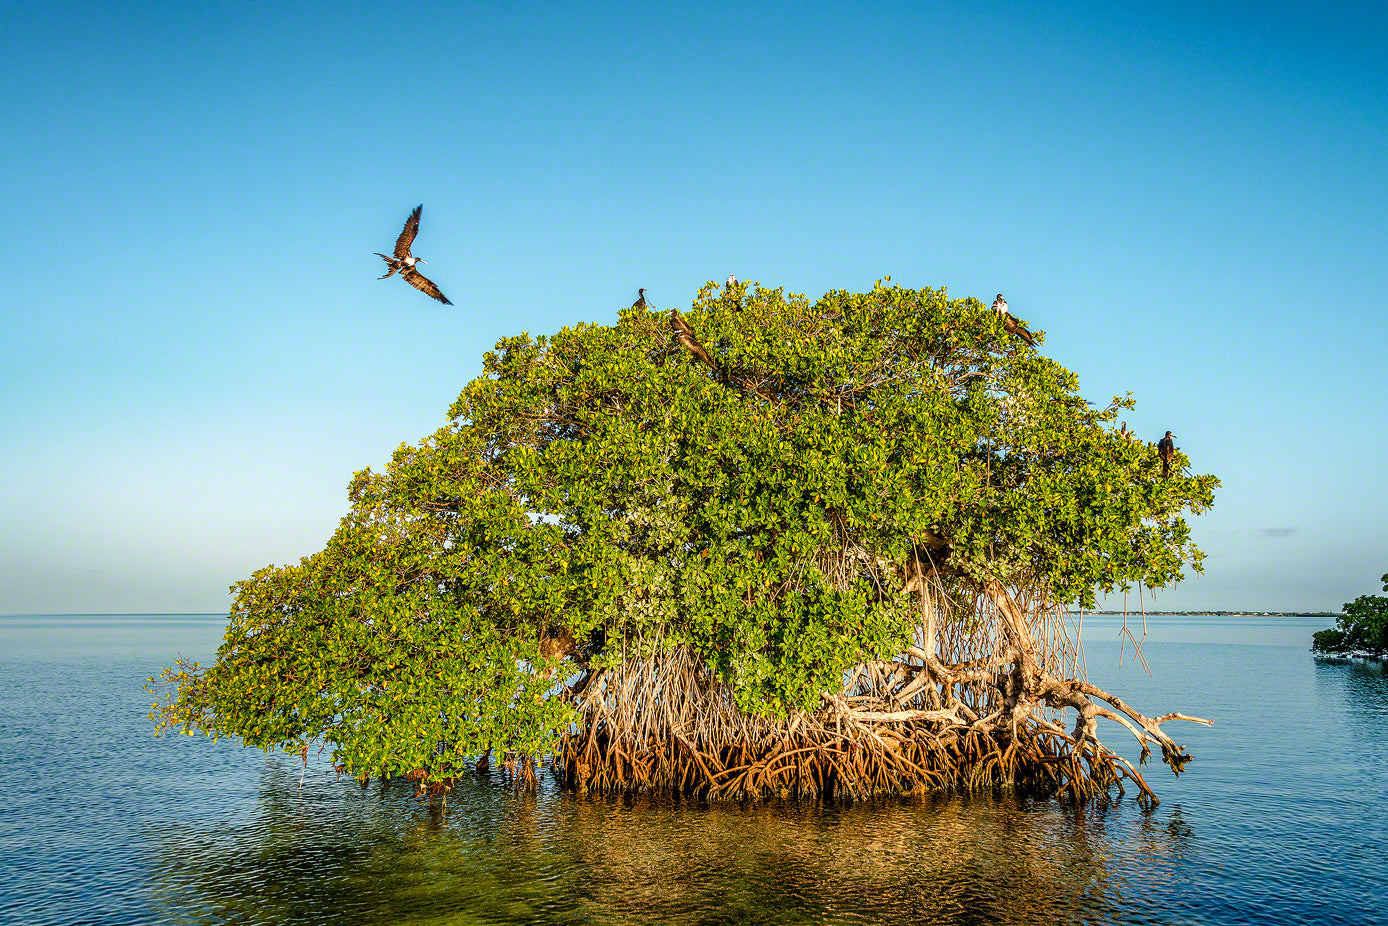 A photo of a group of Frigate Birds nesting on a mangrove island in the Florida Keys